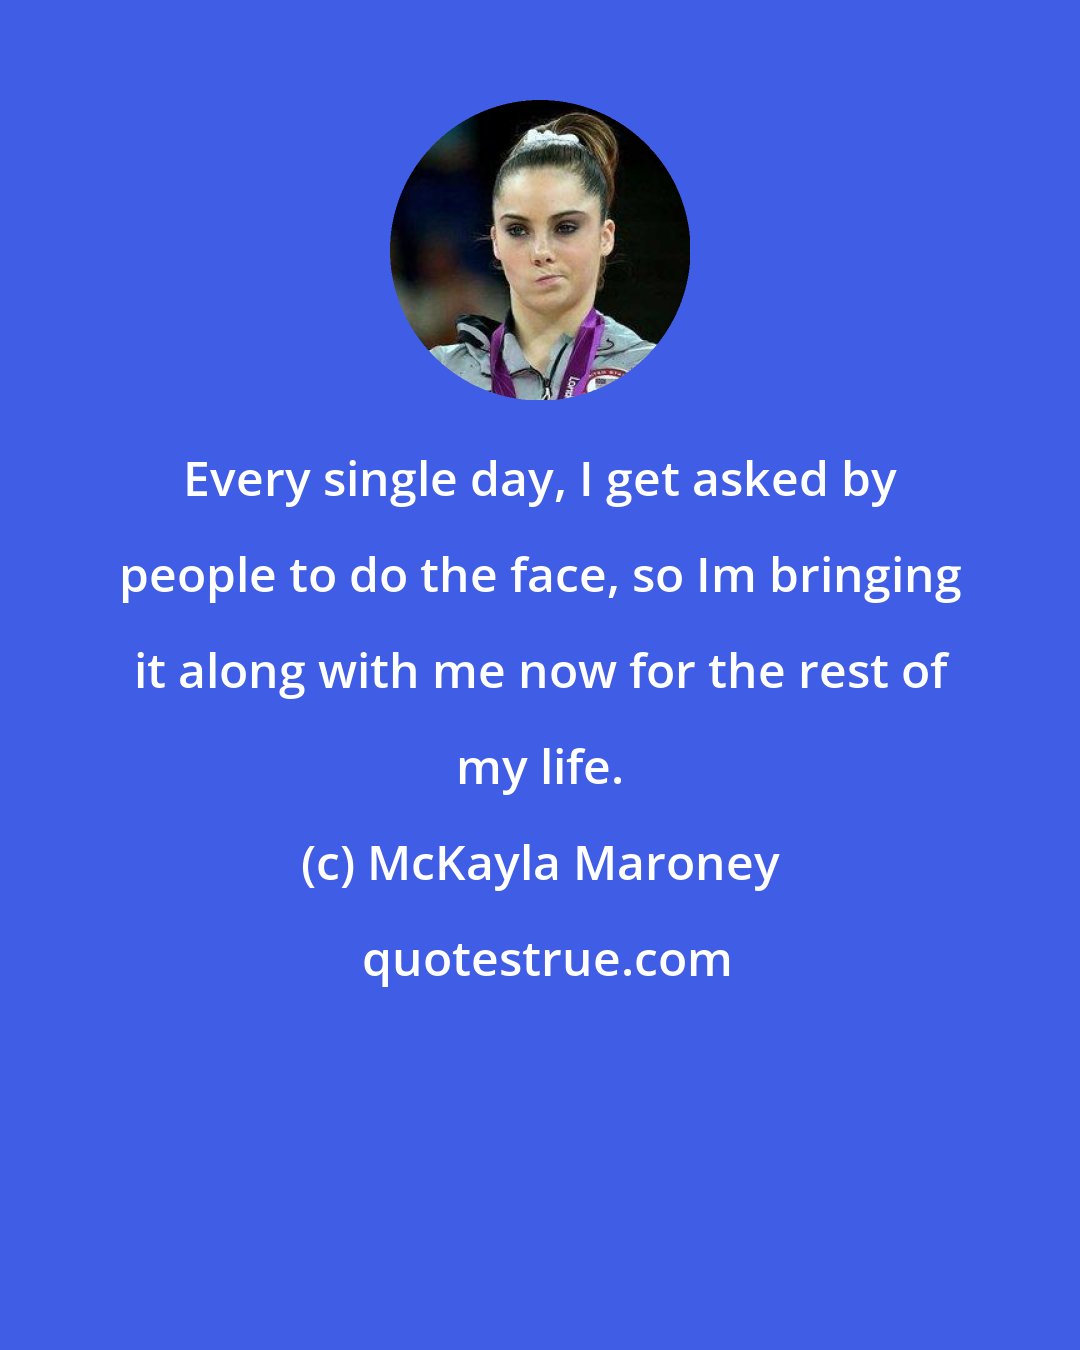 McKayla Maroney: Every single day, I get asked by people to do the face, so Im bringing it along with me now for the rest of my life.